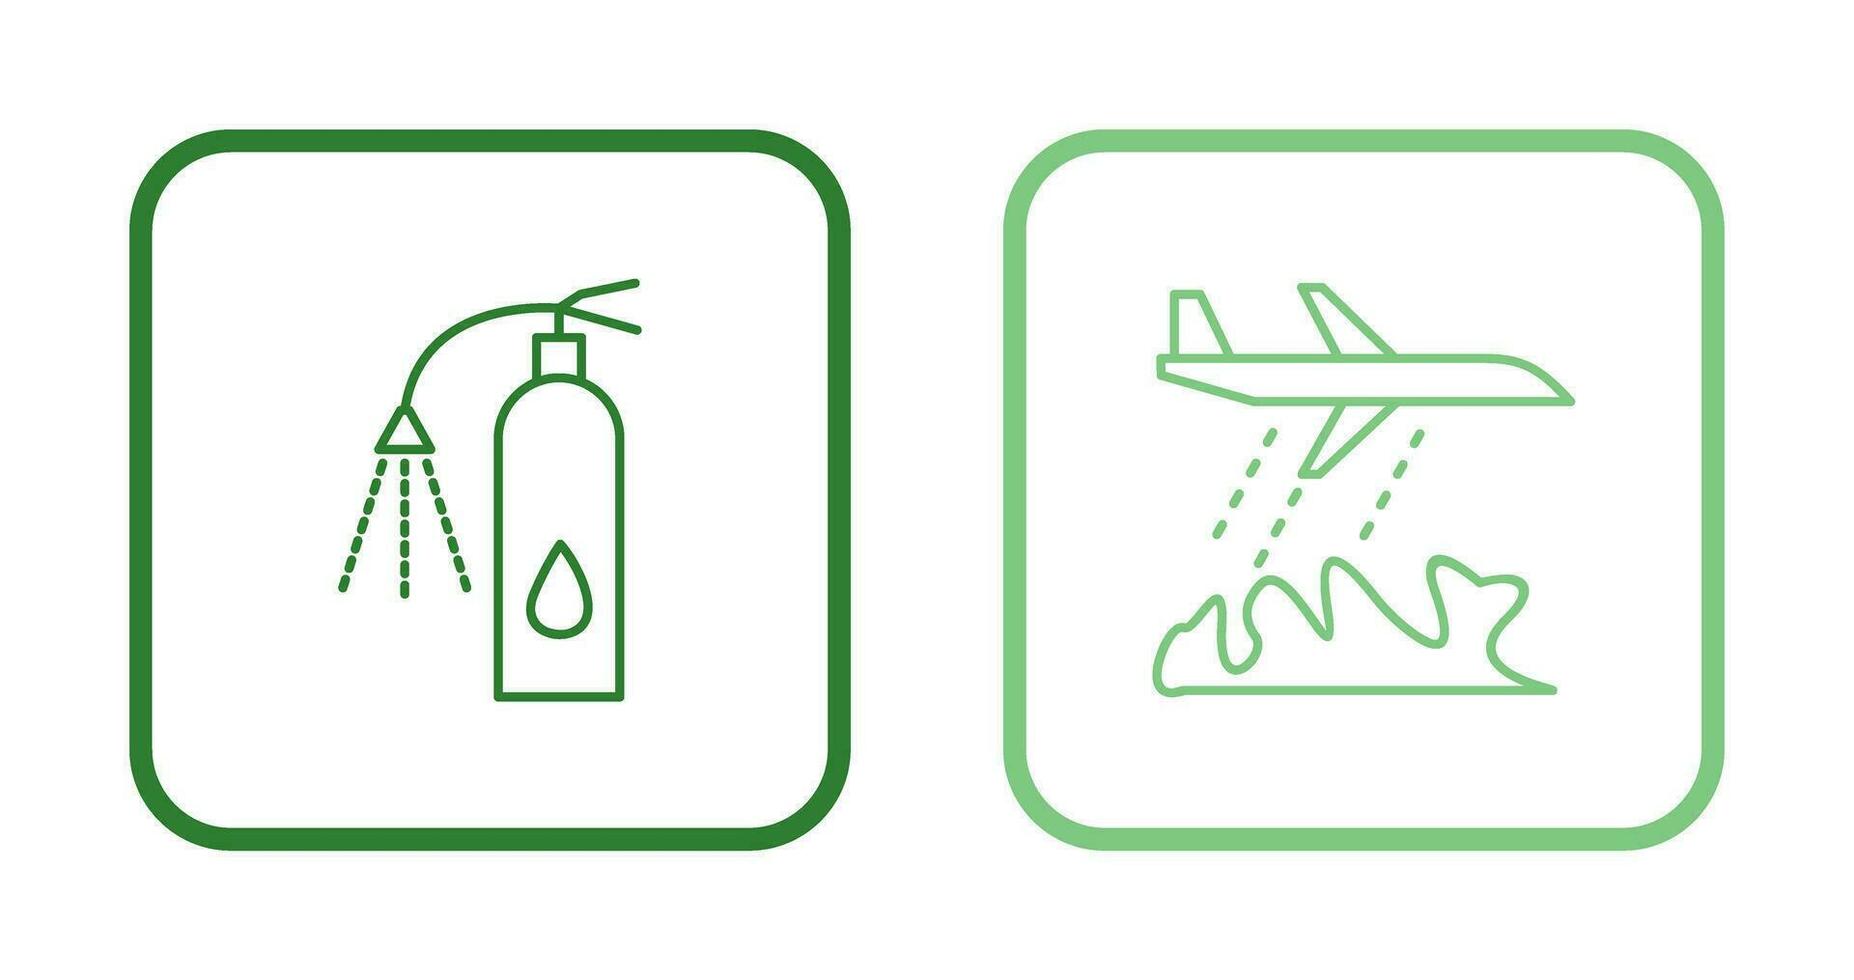 using extinguisher and firefighter plane  Icon vector